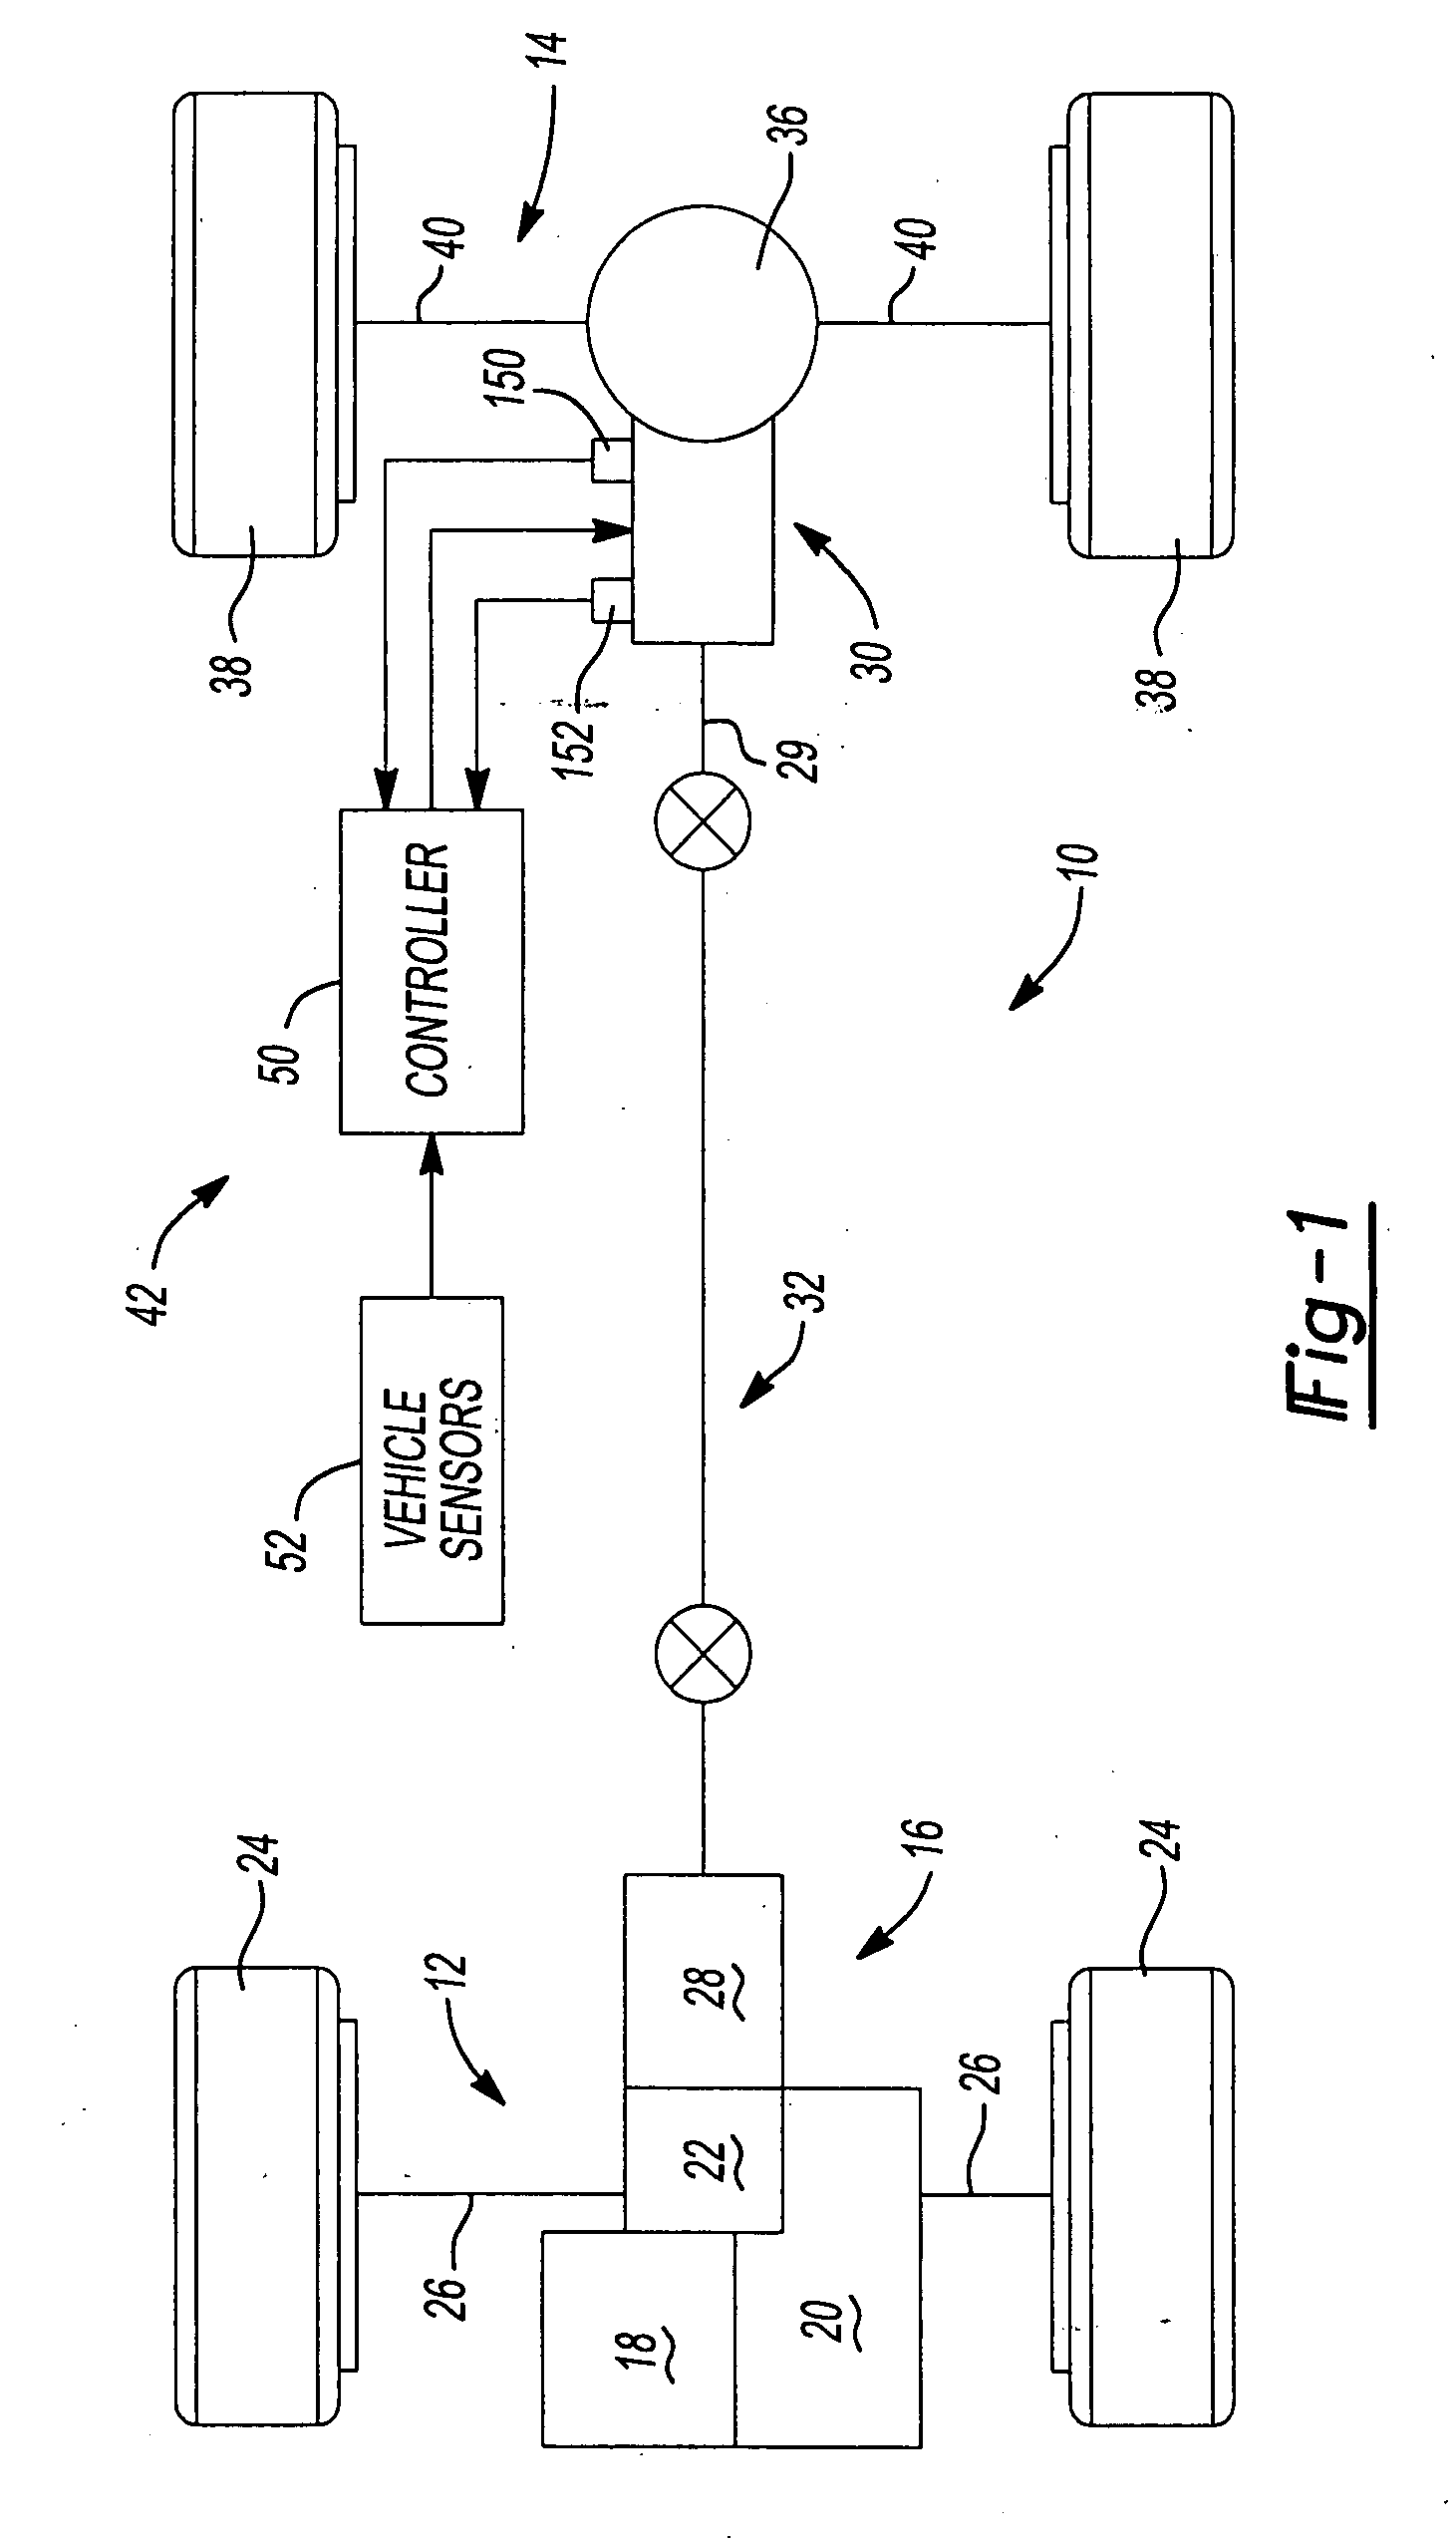 Electrohydraulic torque transfer device and control system